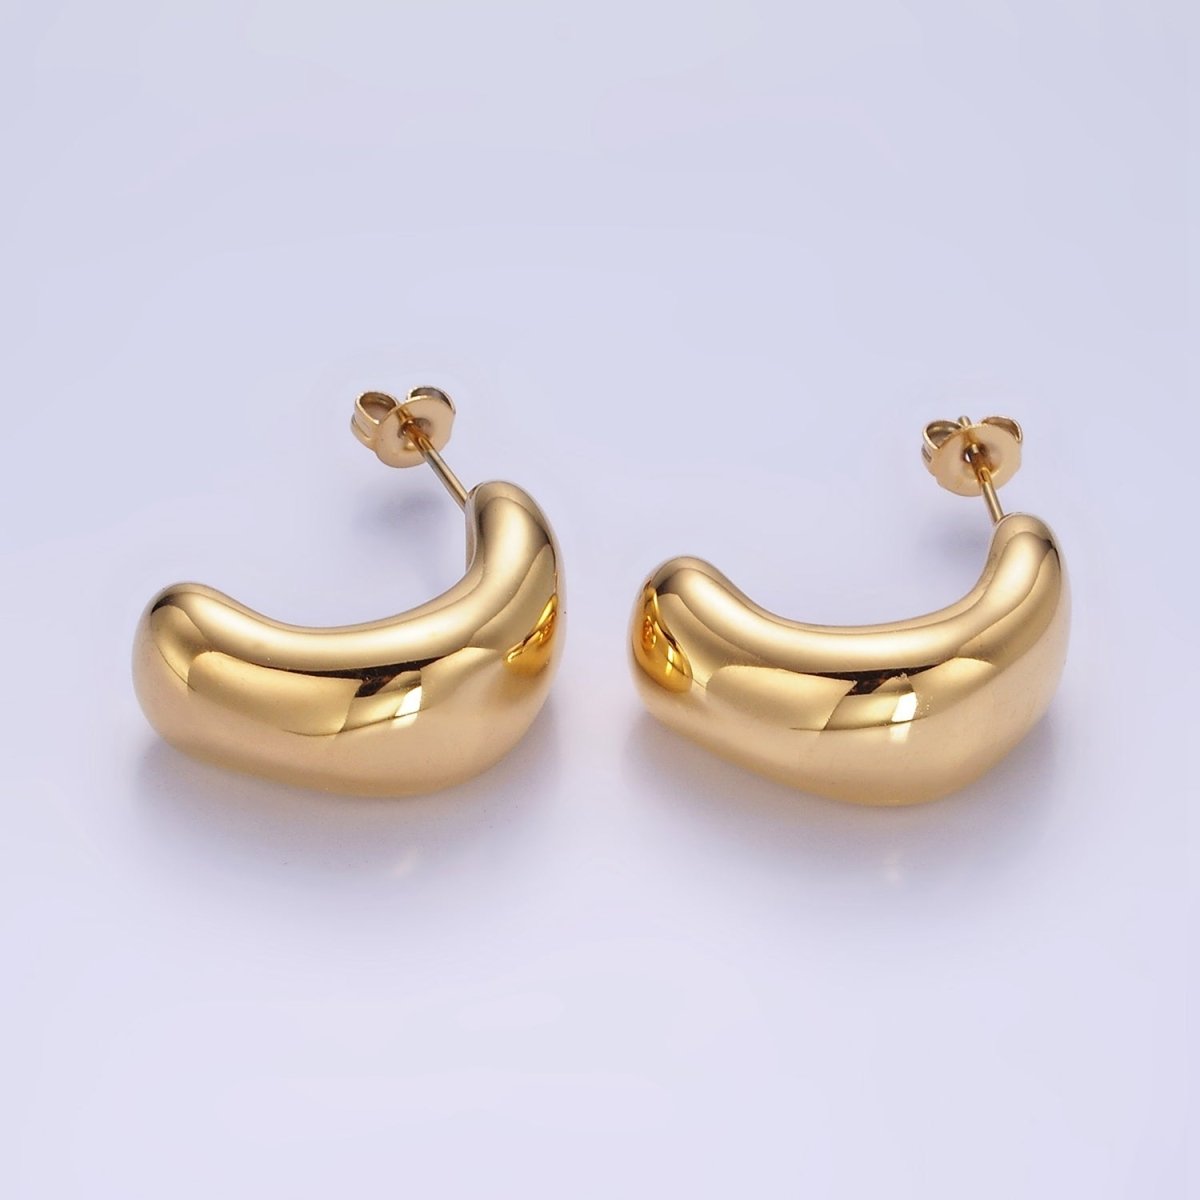 Stainless Steel 20mm Chubby Abstract C-Shaped Hoop Earrings | AE449 - DLUXCA